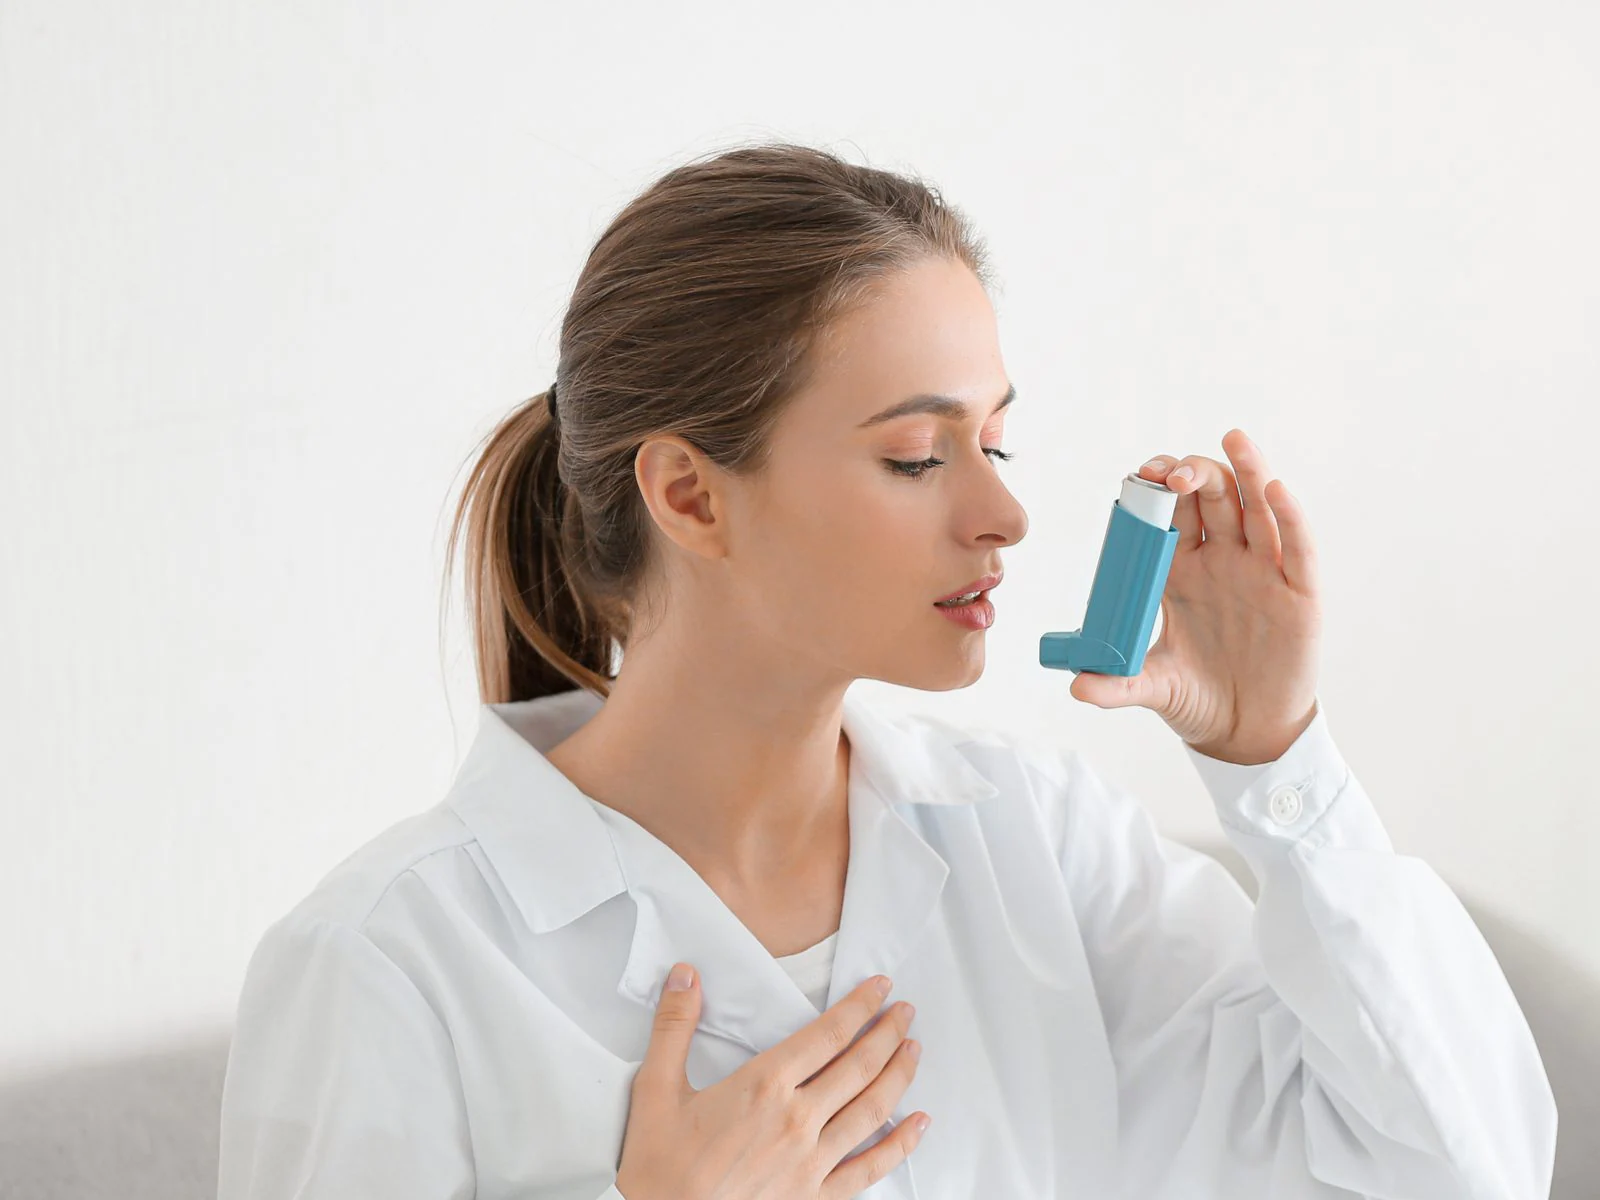 When You Have Asthma, You Are Likely To Experience Anger